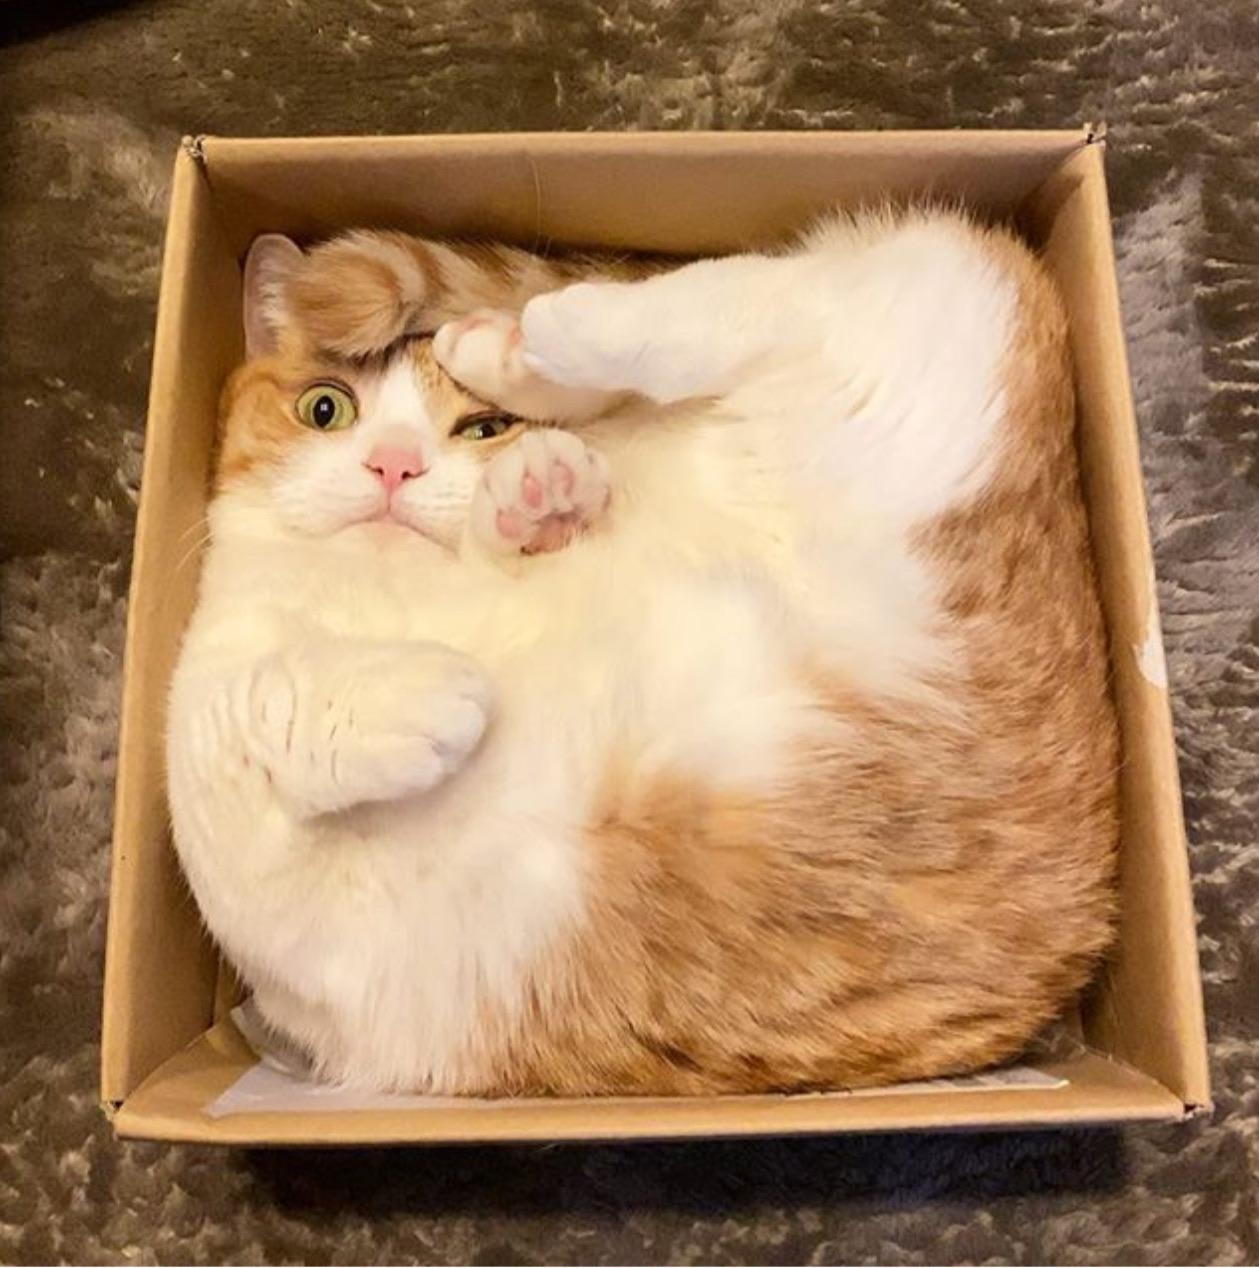 Purrfect fit